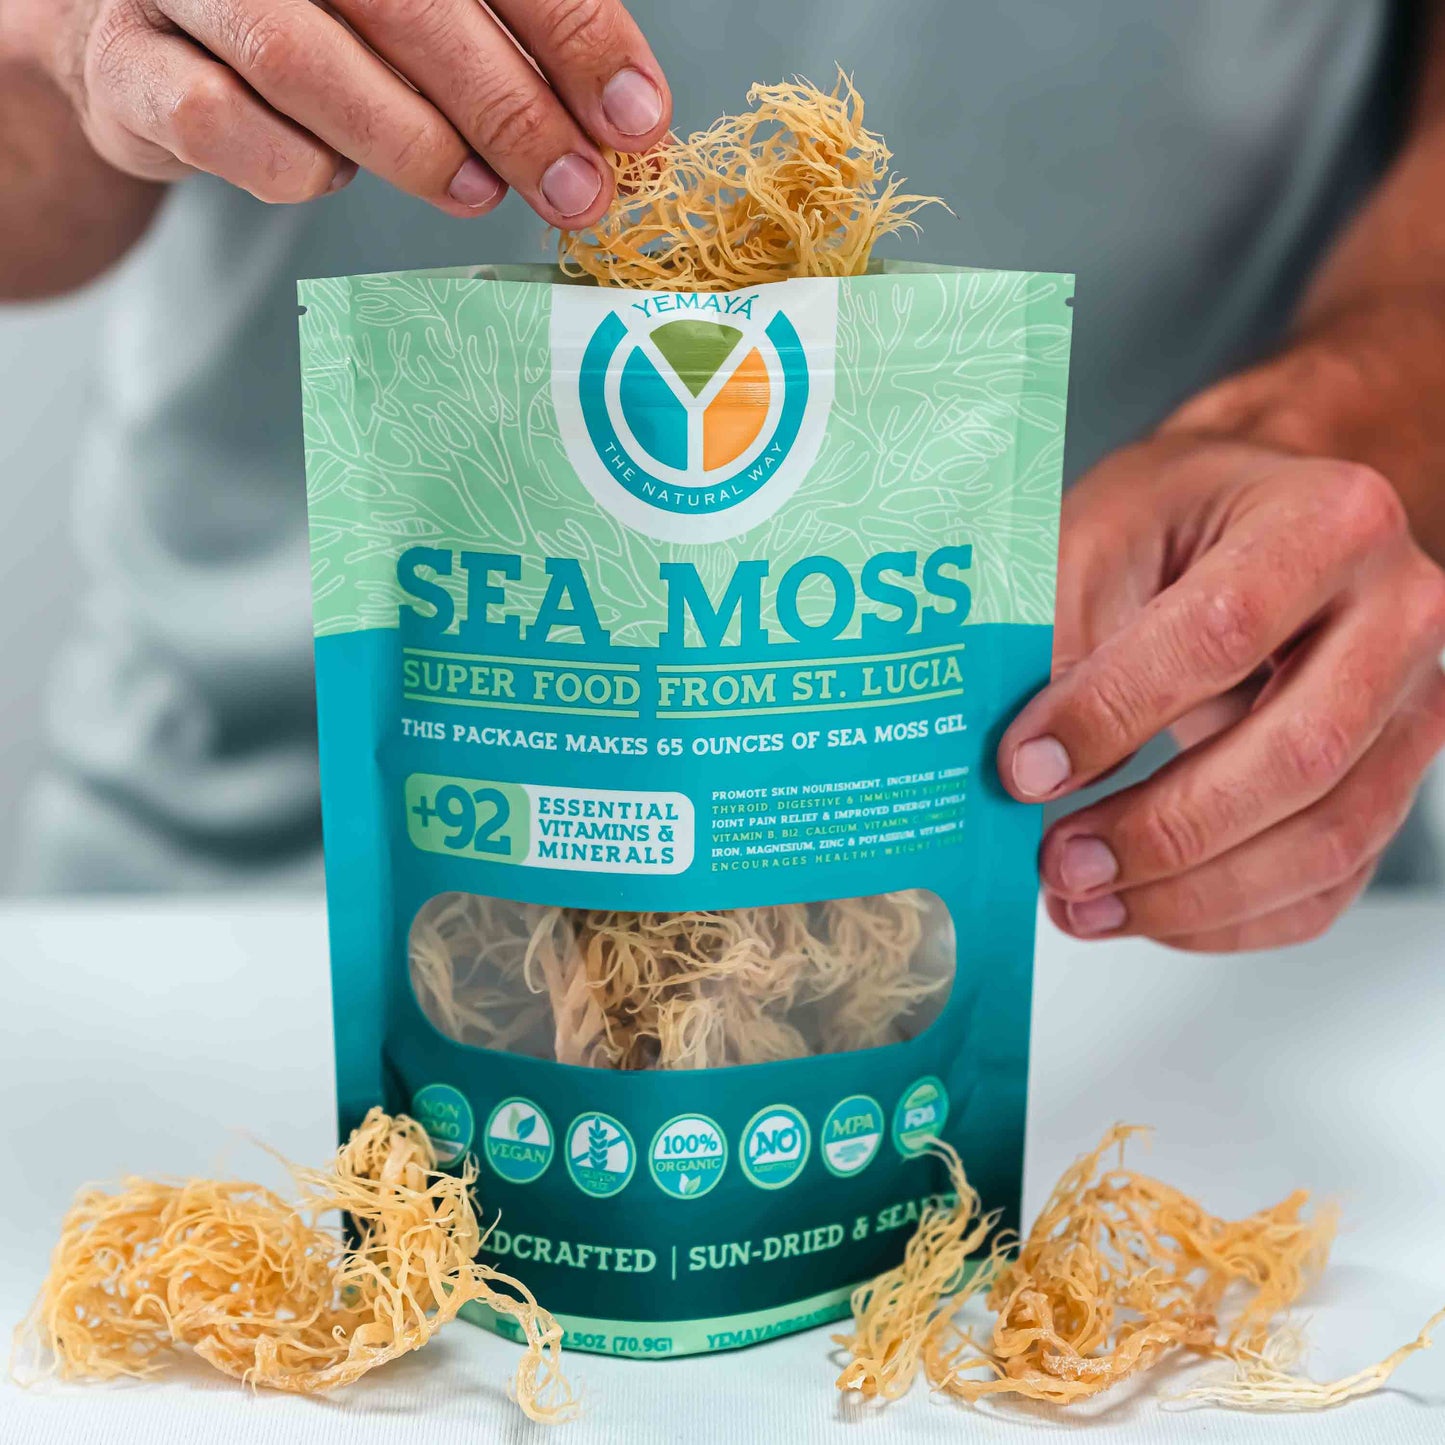 
                  
                    Wildcrafted GOLD Sea Moss 2.5 oz
                  
                